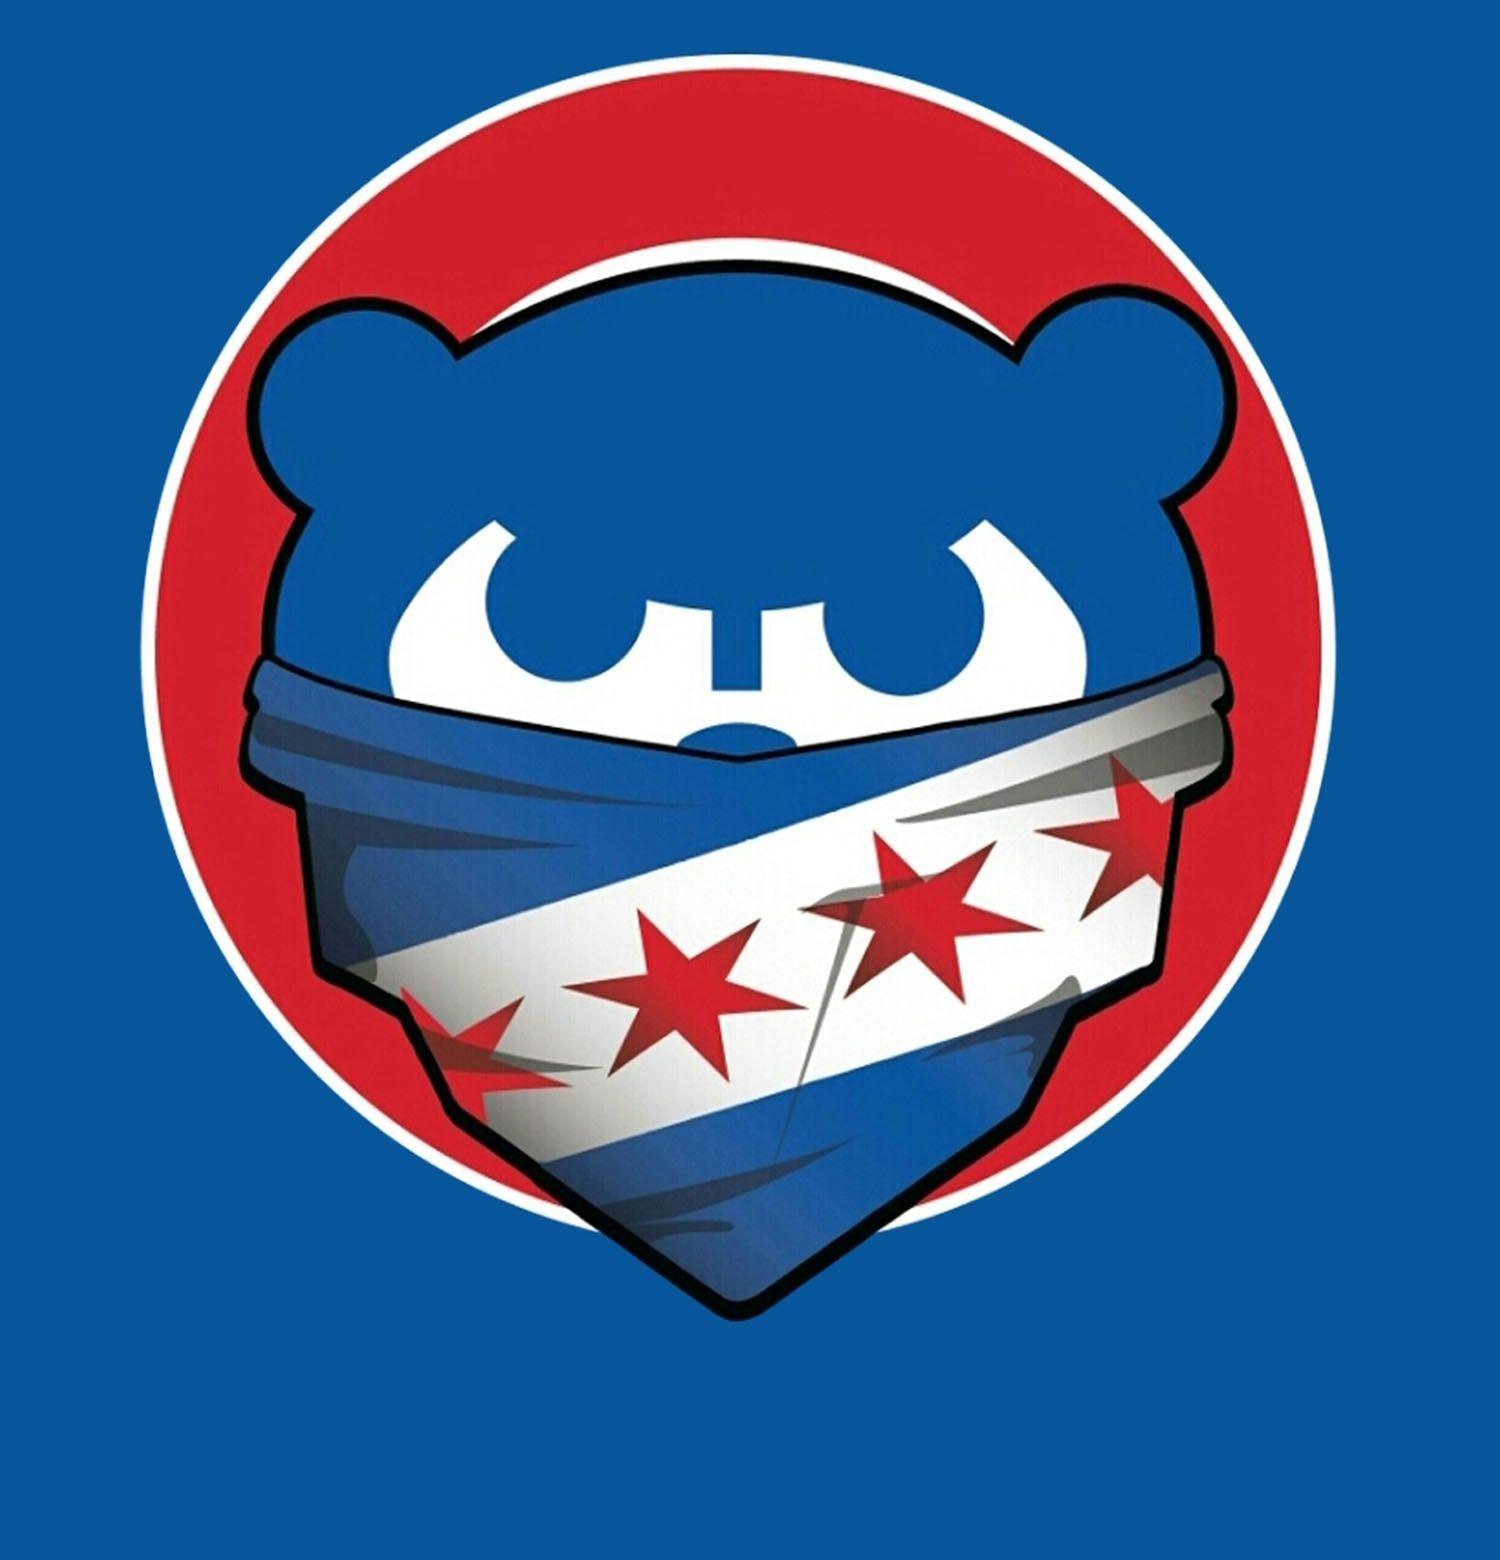 Details about Chicago Cubs City of Chicago Bandana Scarf Flag T